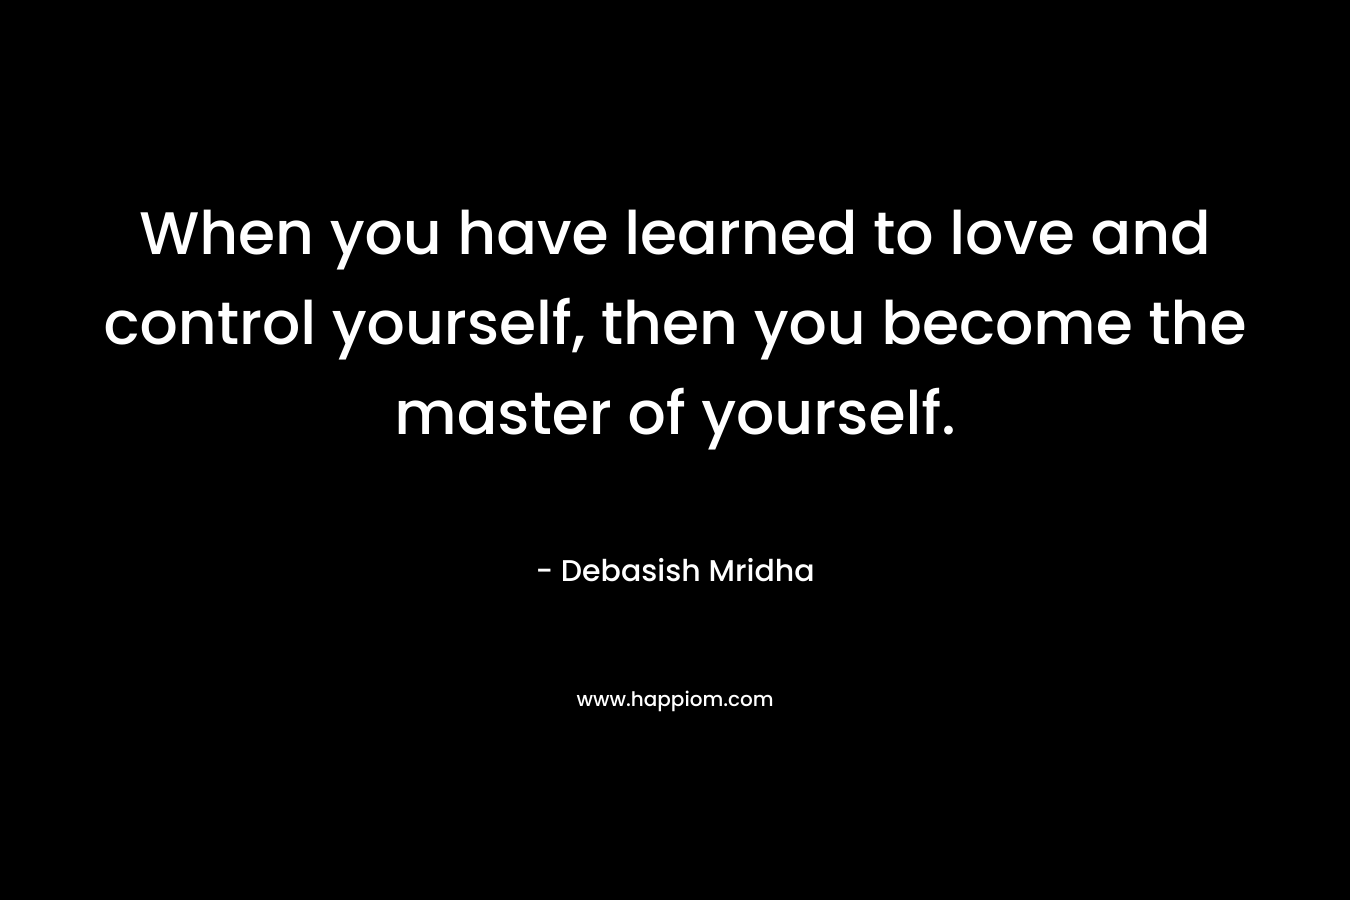 When you have learned to love and control yourself, then you become the master of yourself.